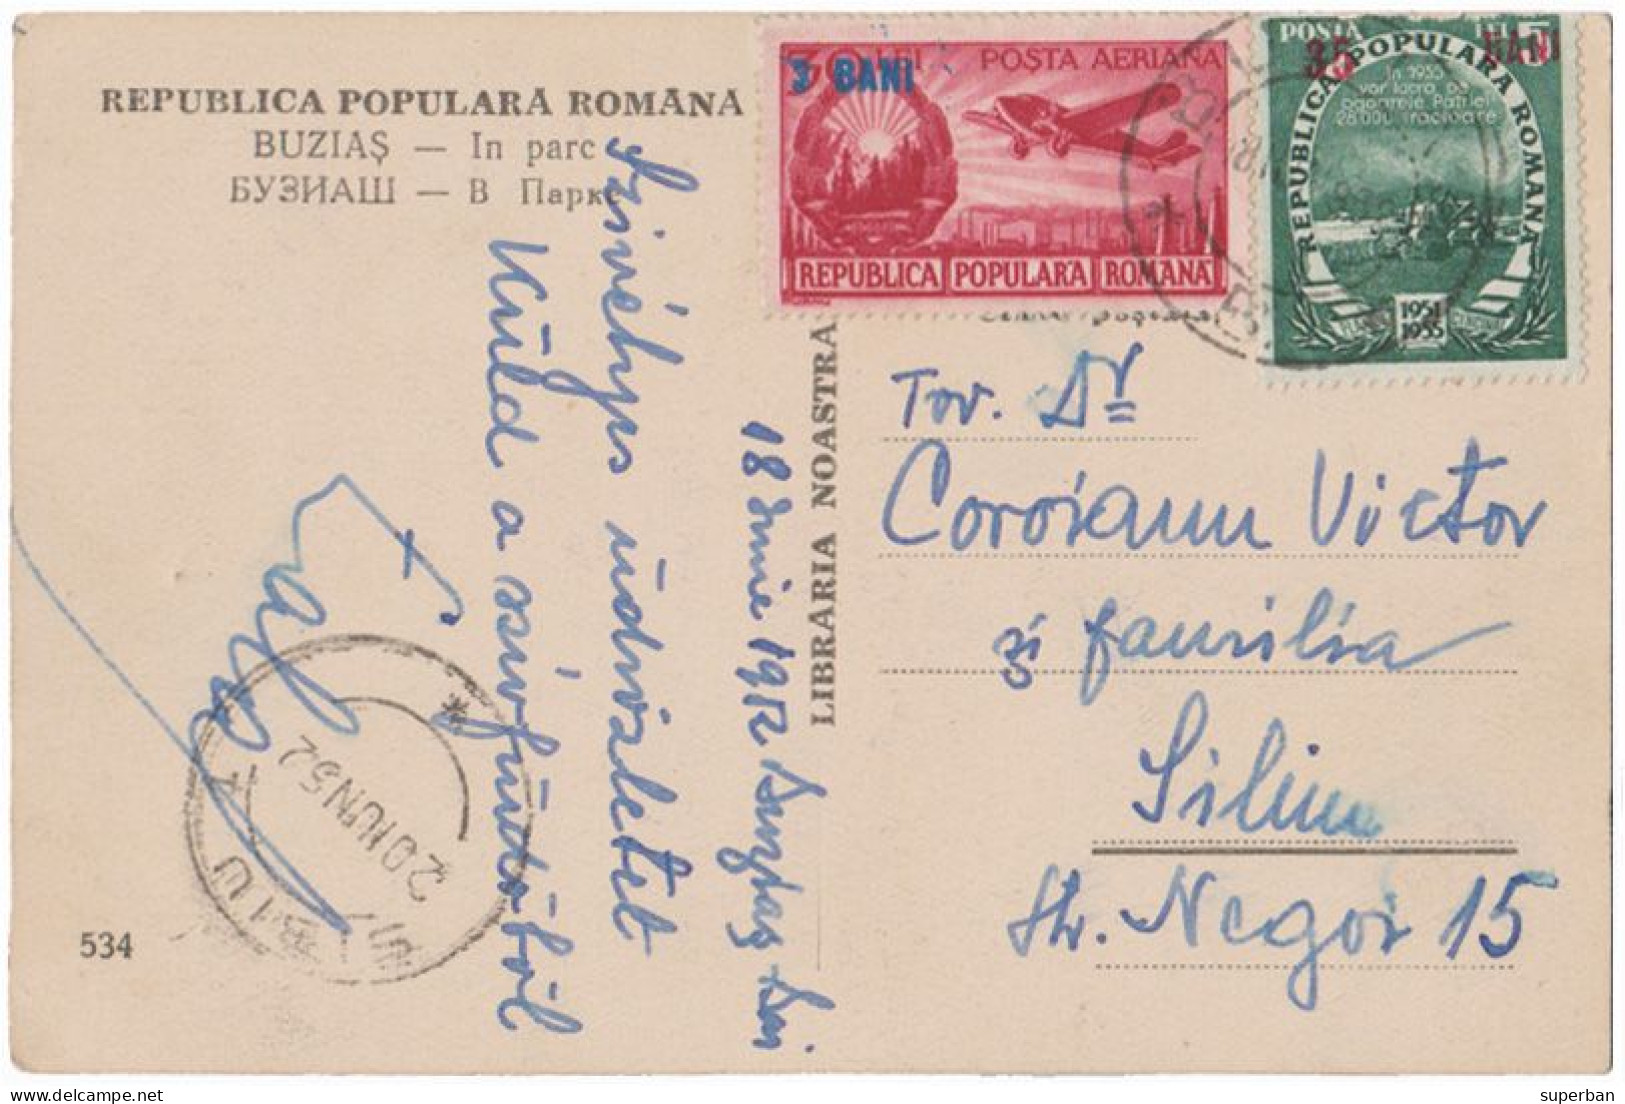 ROMANIA : 1952 - STABILIZAREA MONETARA / MONETARY STABILIZATION - POSTCARD MAILED With OVERPRINTED STAMPS - RRR (an319) - Covers & Documents